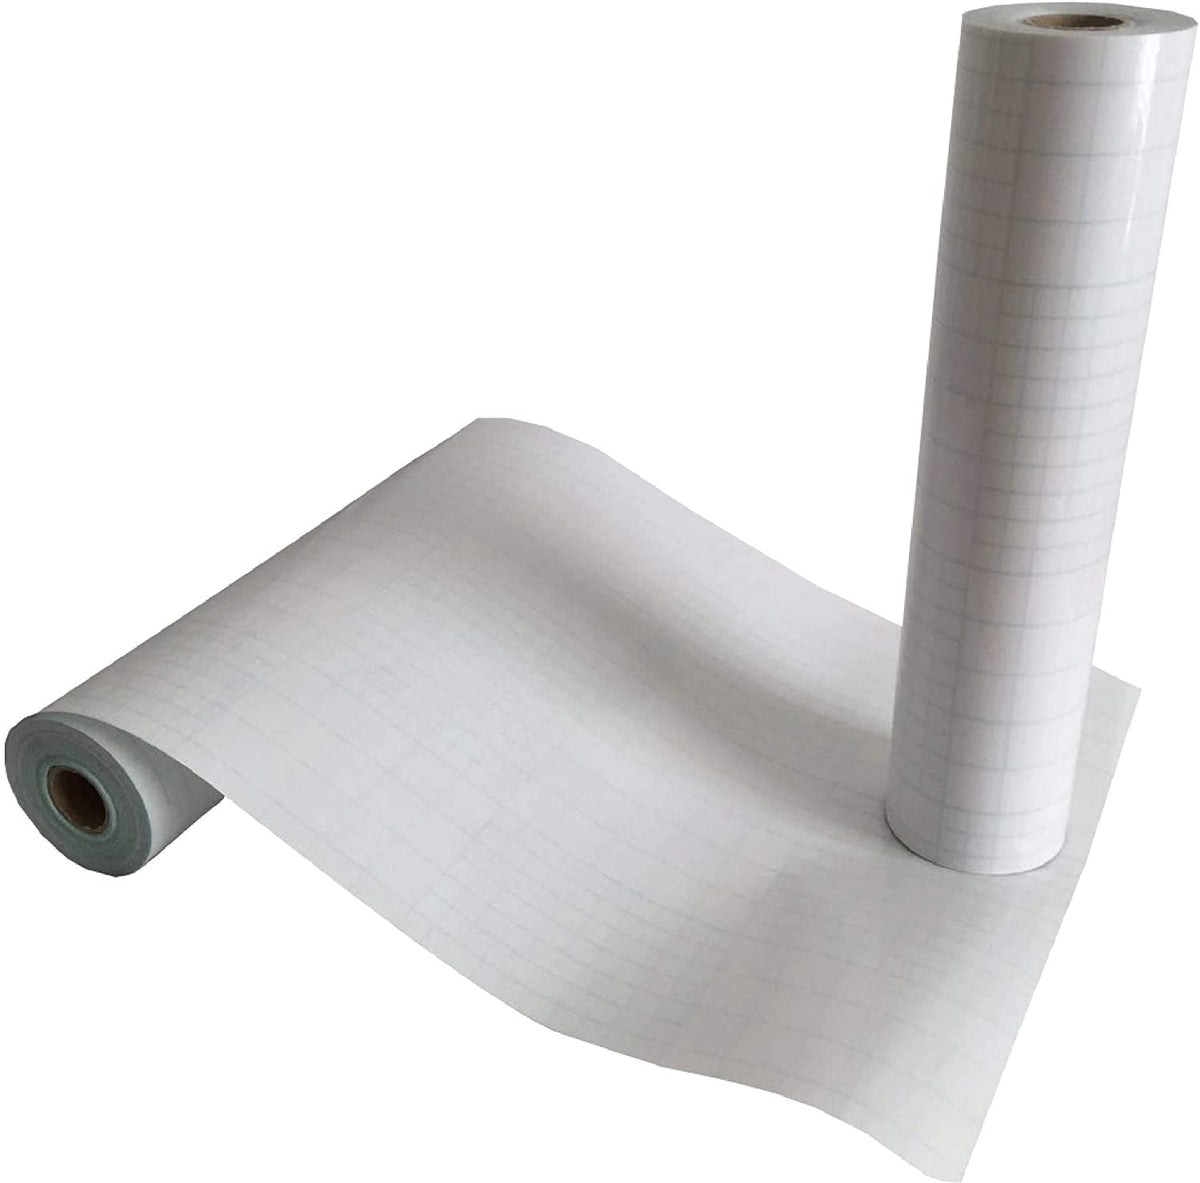 Clear Transfer Tape with Grid, 6 inches x 100 feet, Made in